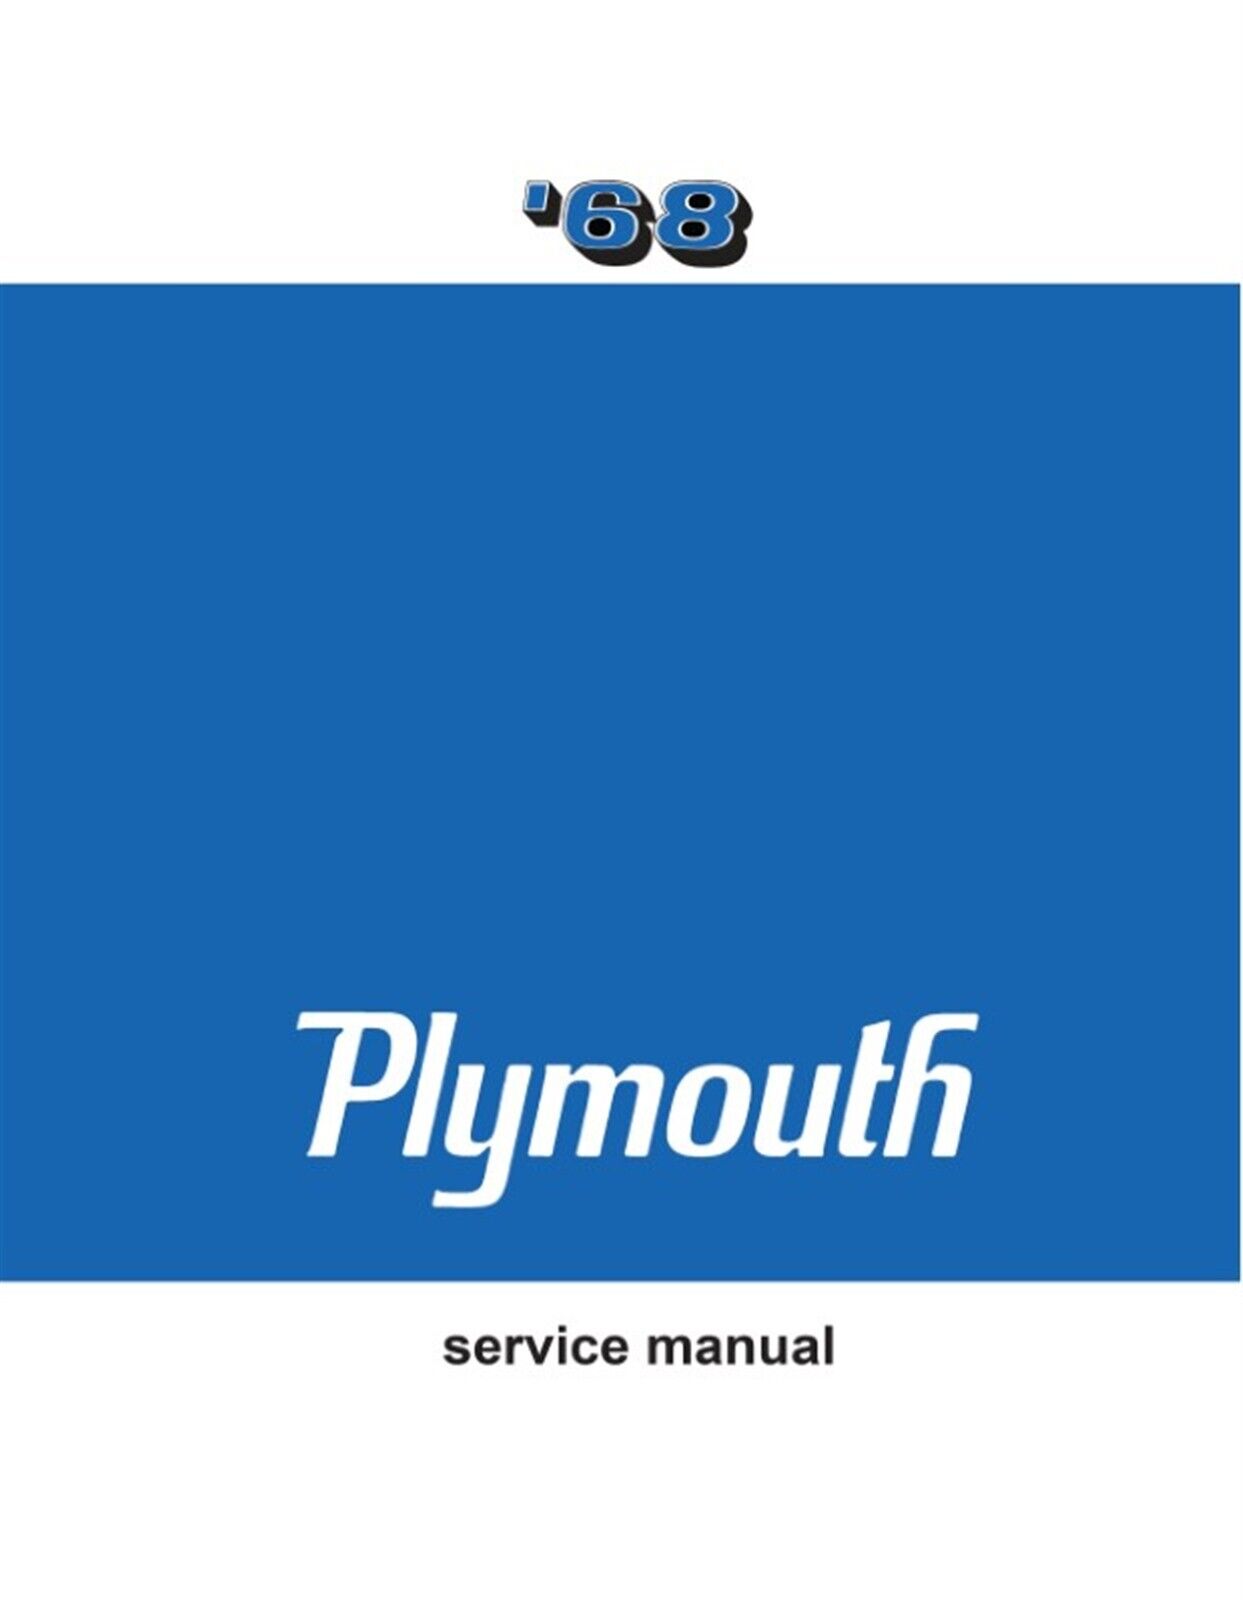 1968 Plymouth Factory Service Manual